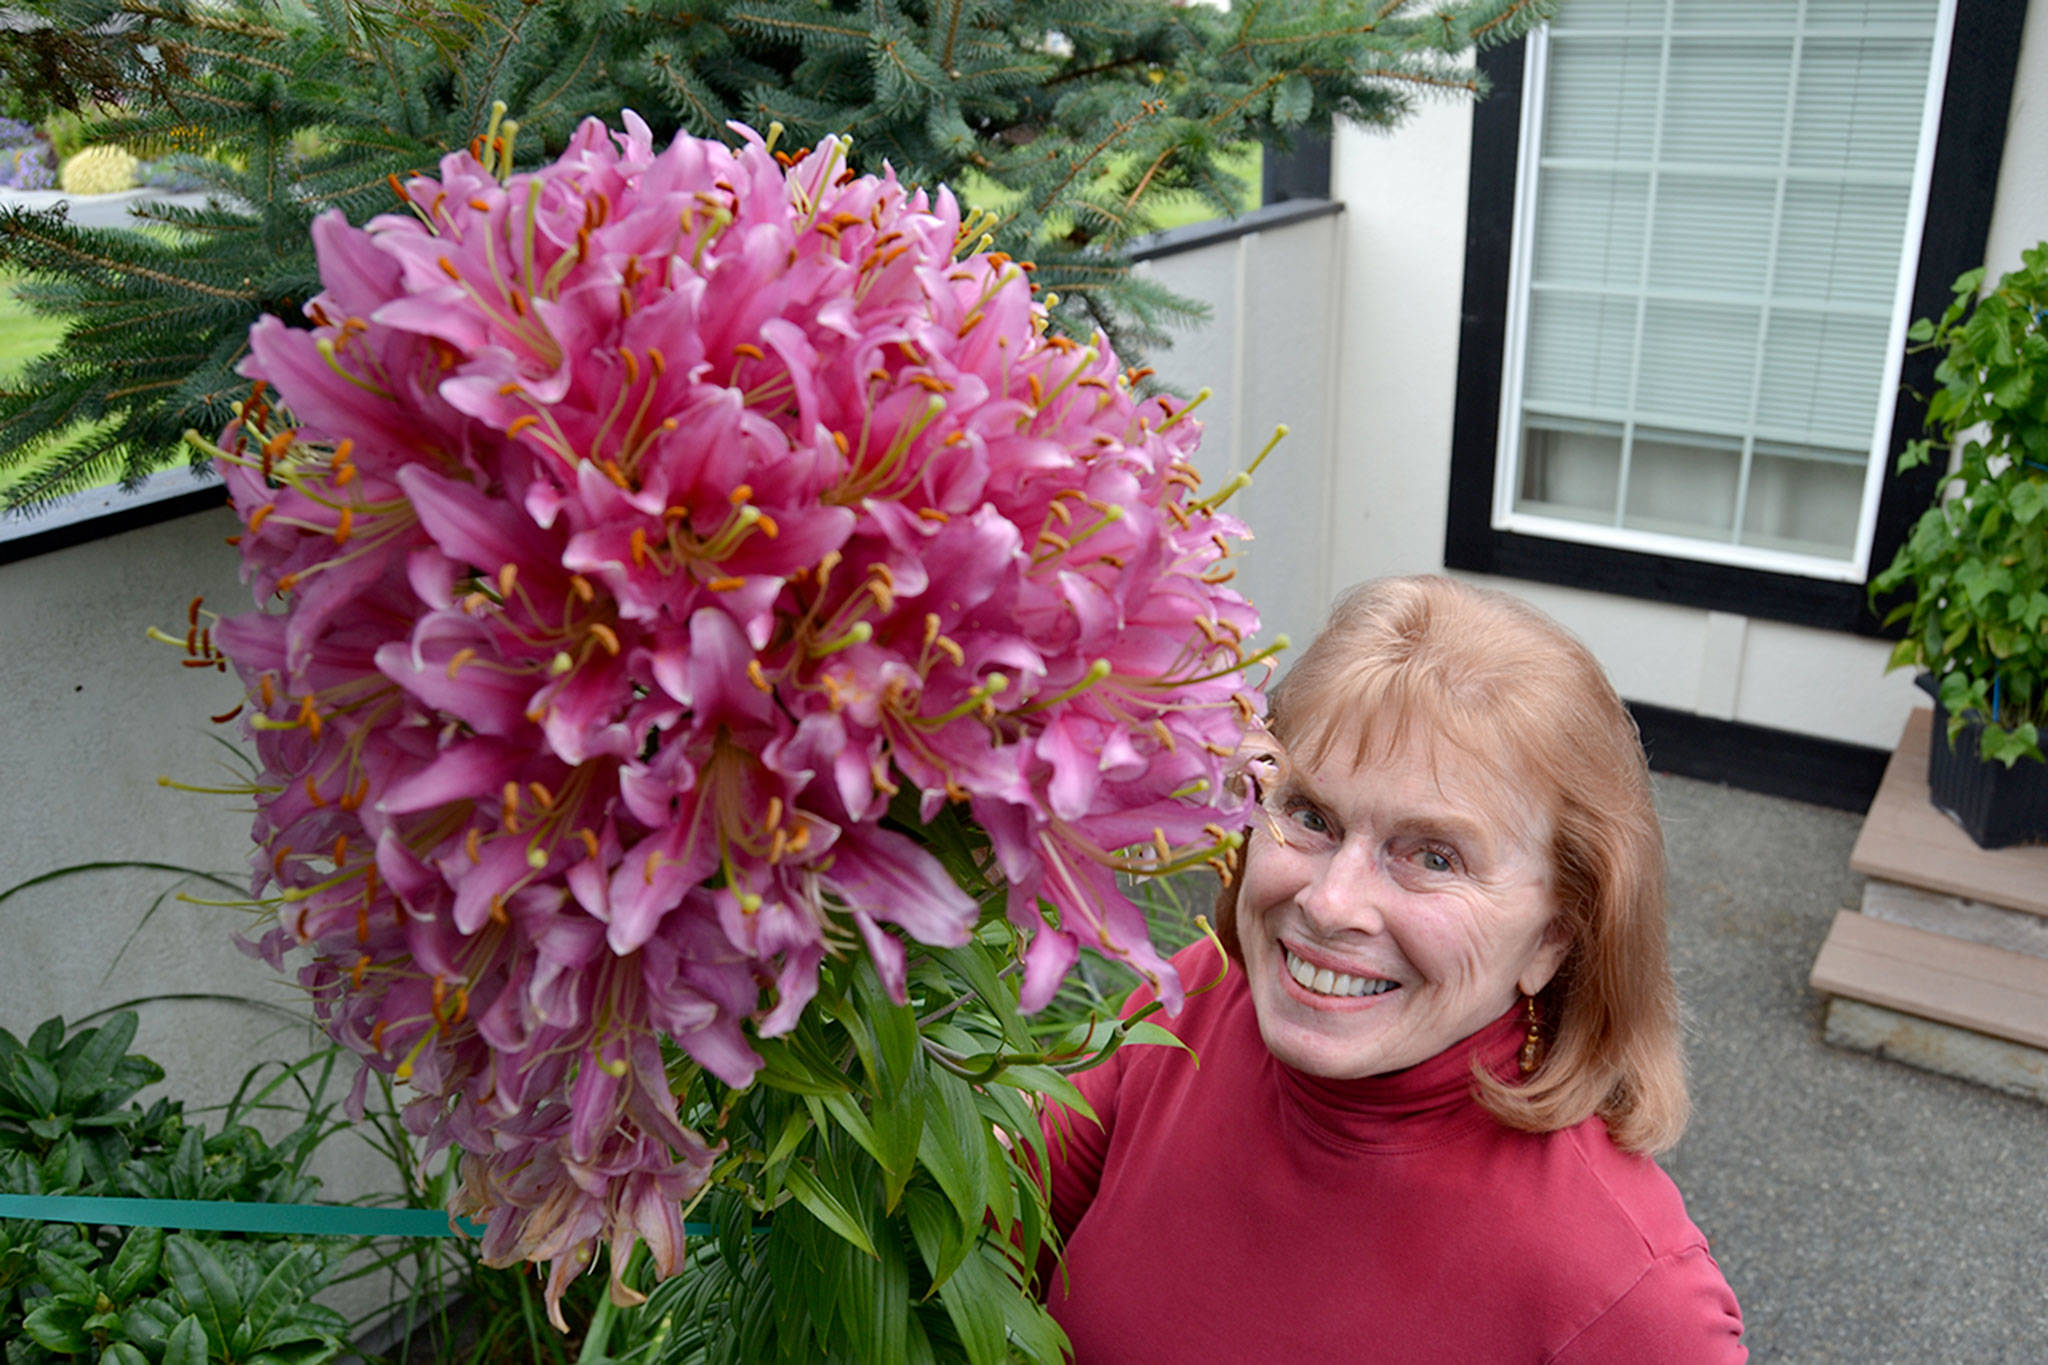 Julie Tarbuck of Sequim said she had to speak with local experts to learn what was happening with her lily. She was told its bulb “fasciated,” growing a thick, flat stem with about 100 flowers. Sequim Gazette photos by Matthew Nash